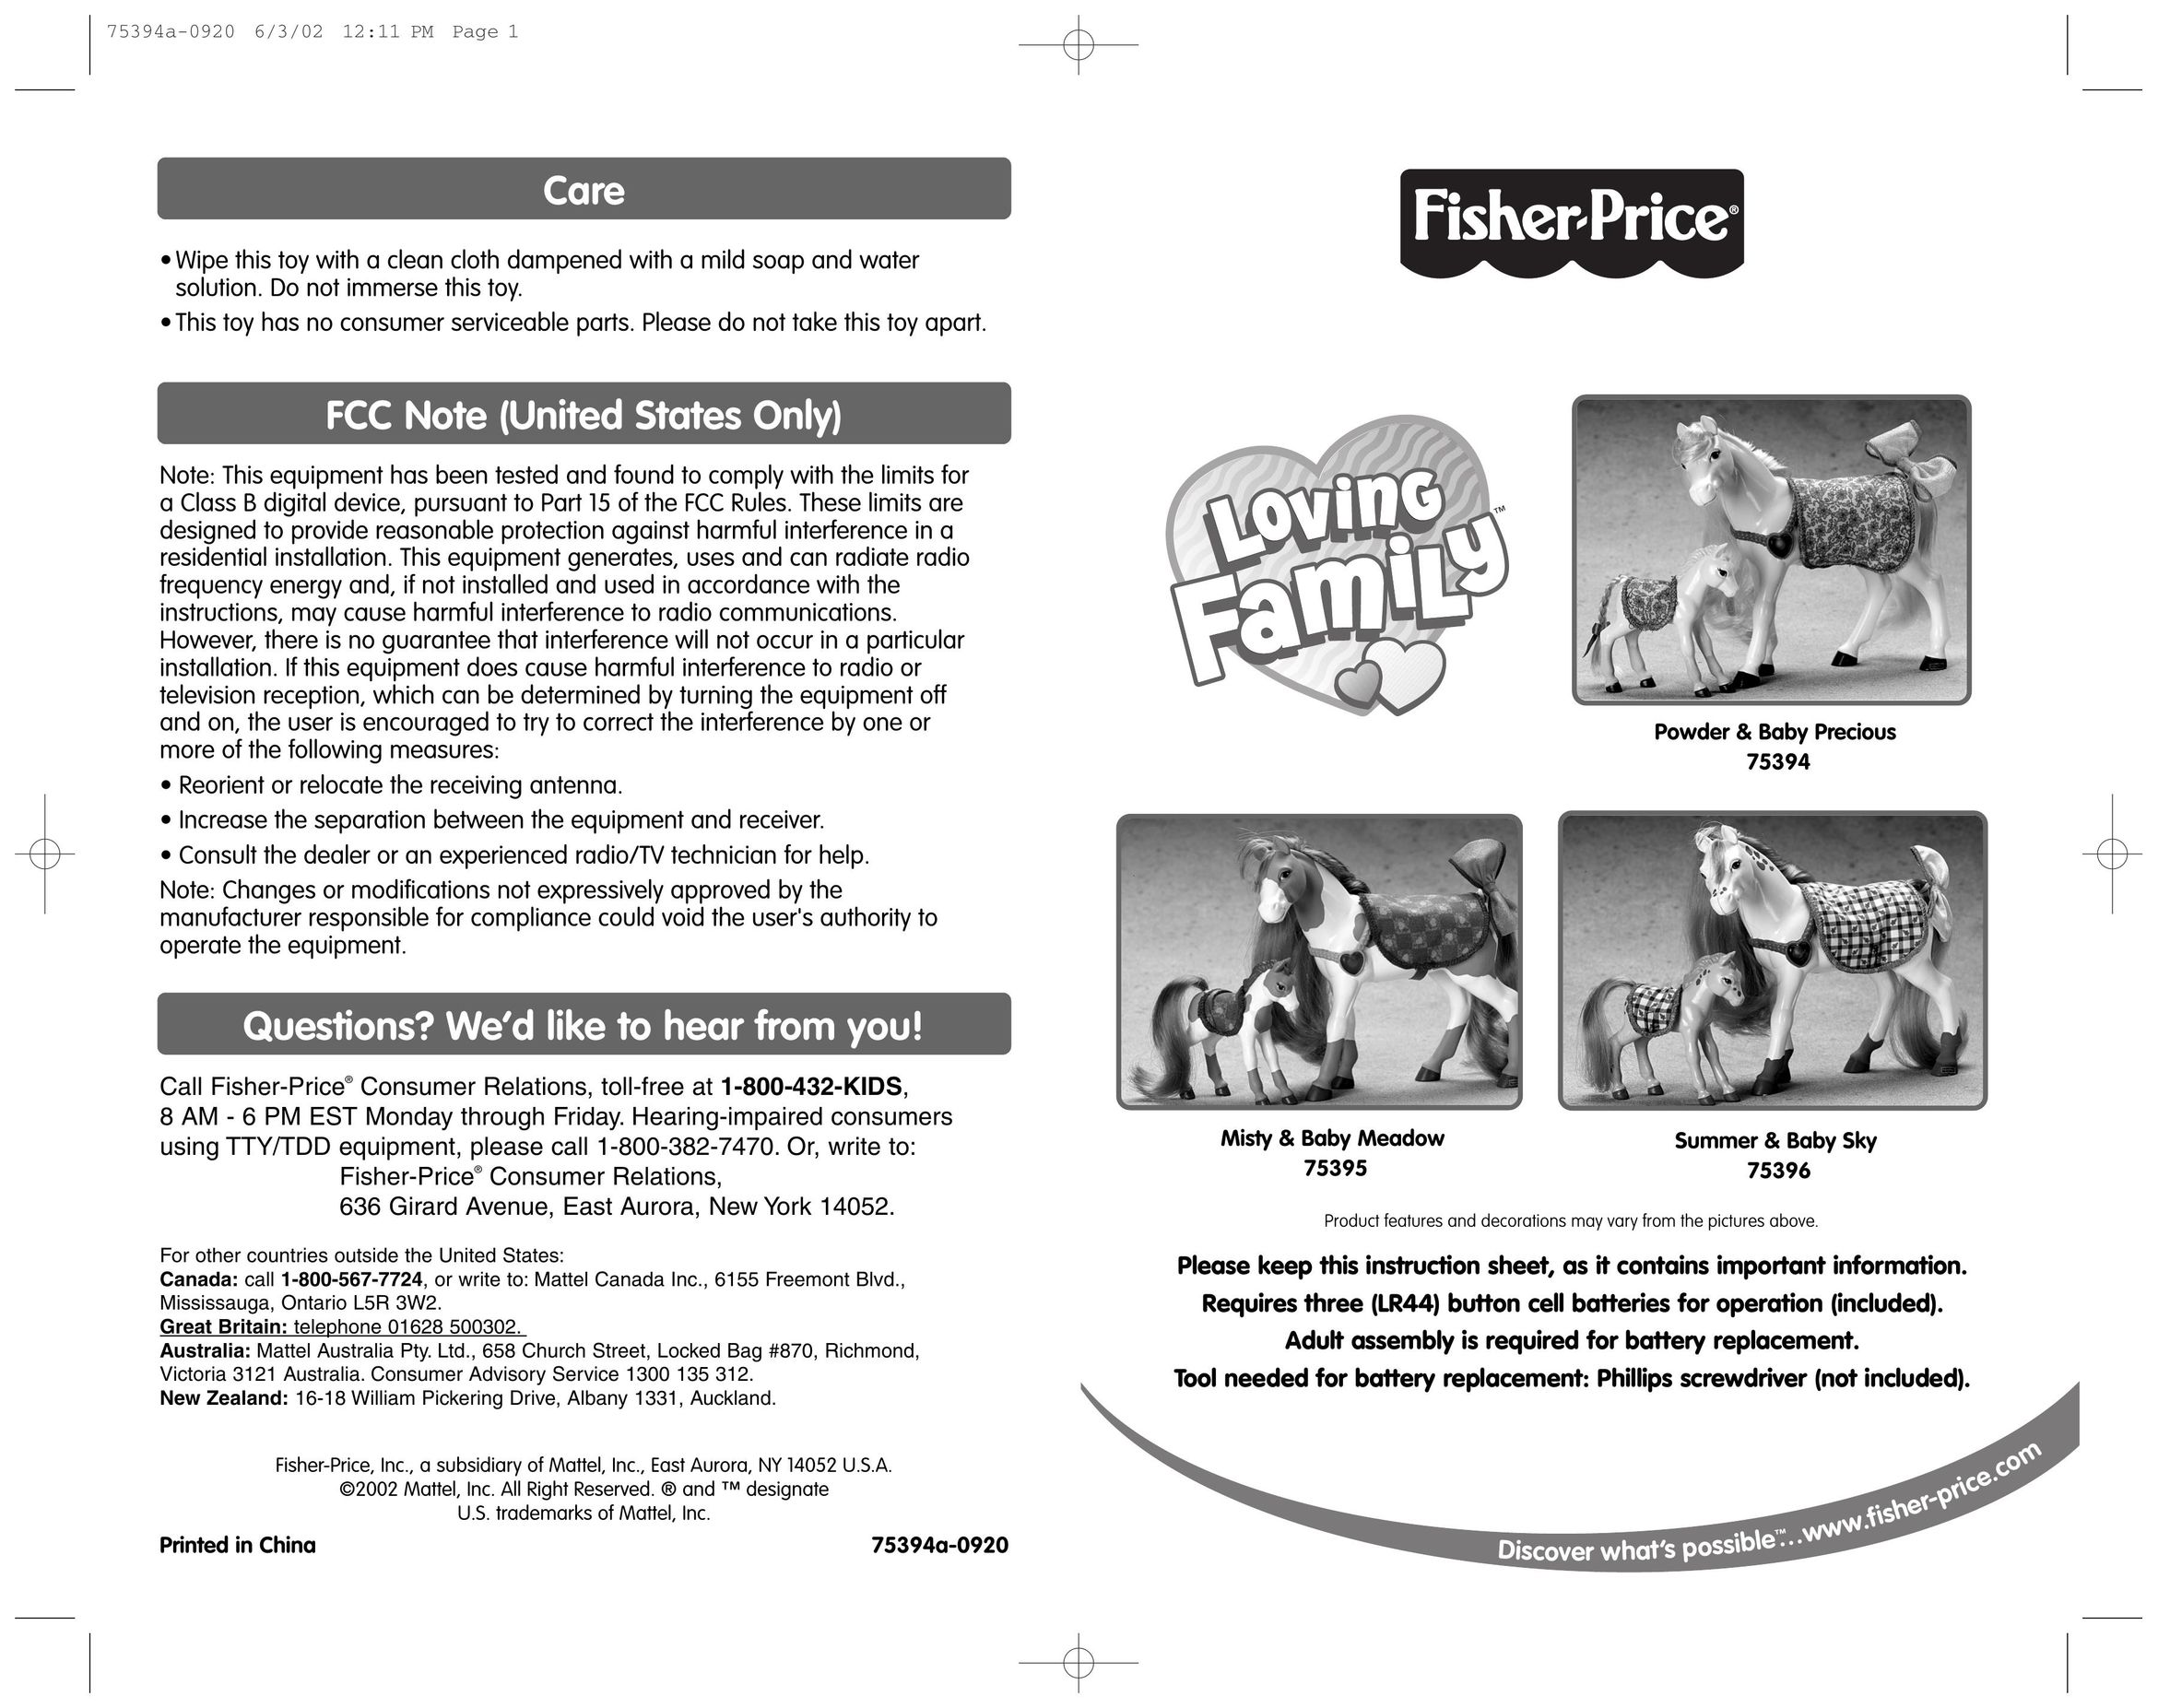 Fisher-Price 75394a-0920 Doll User Manual